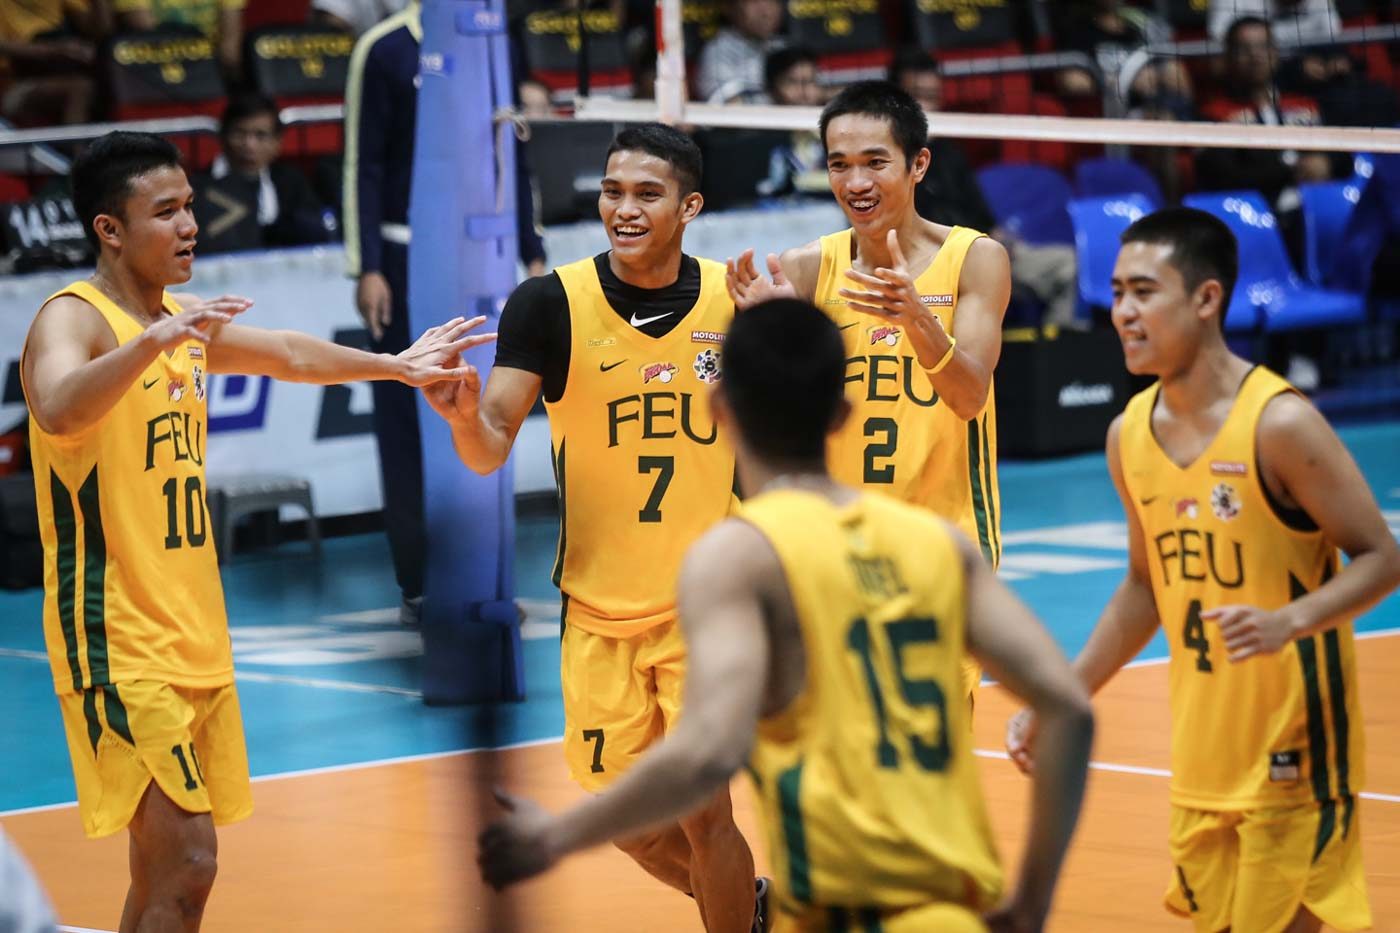 Men’s volleyball: FEU outlasts UST to stay perfect